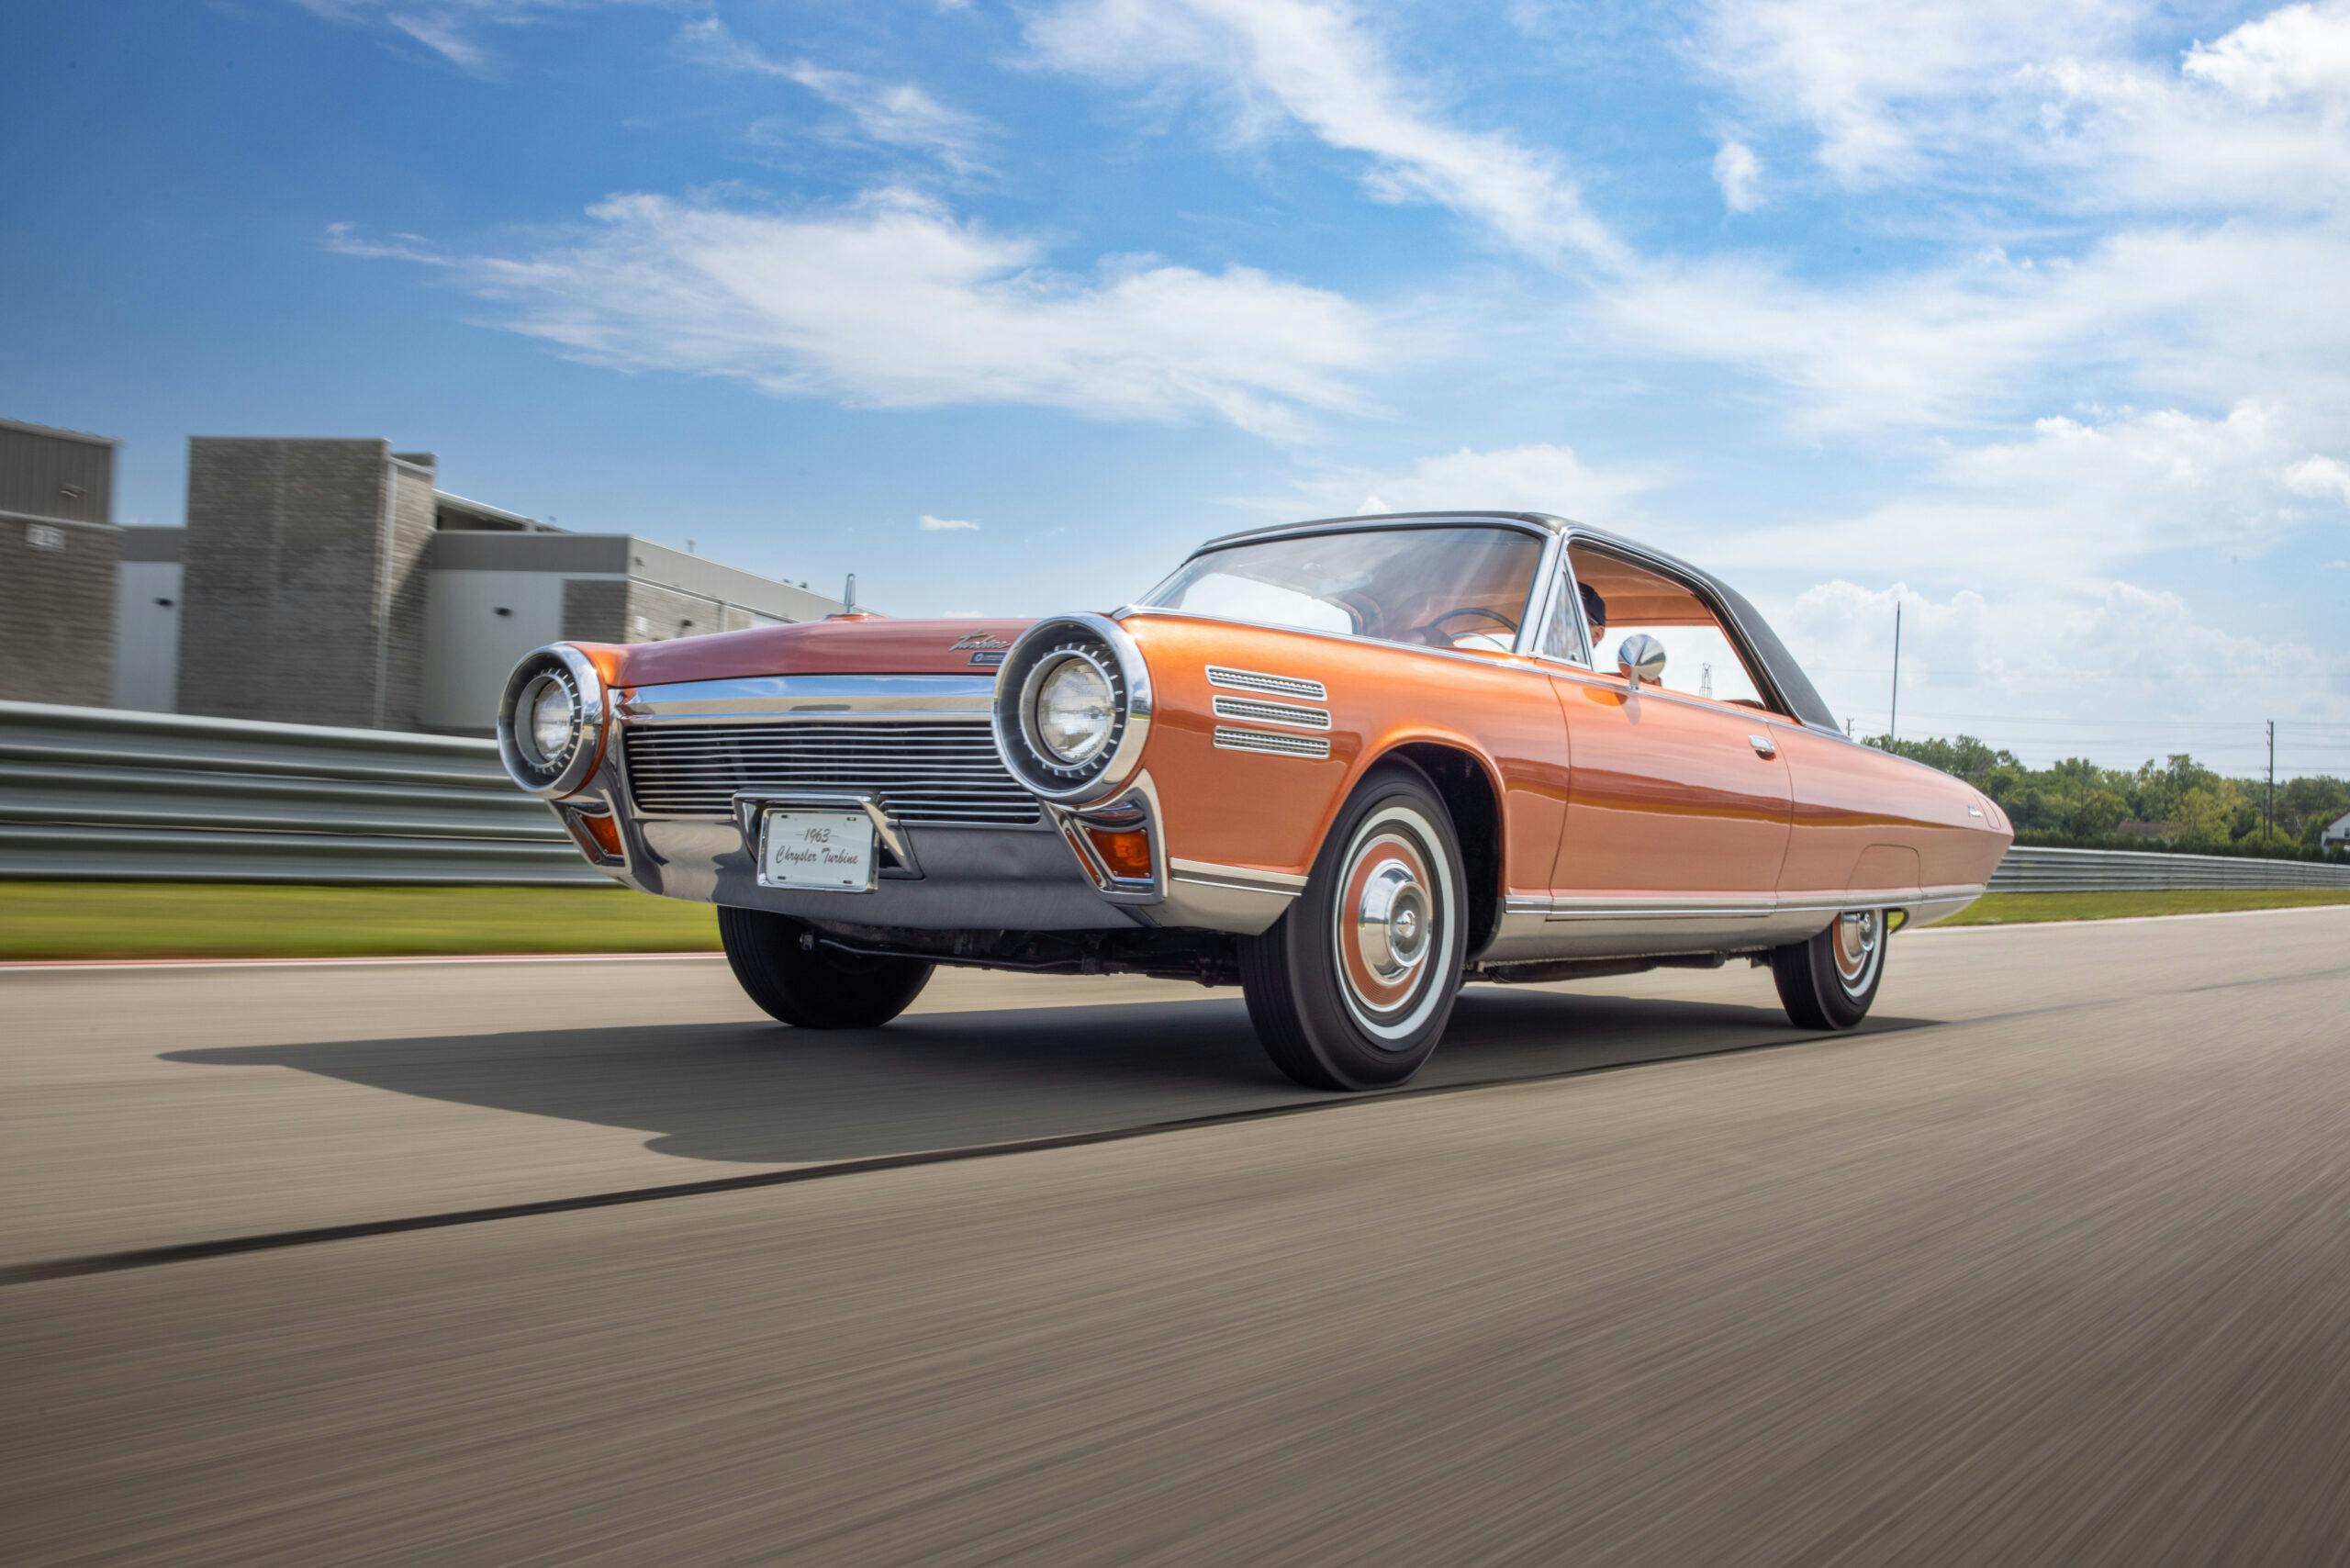 6 things you didn't know about Chrysler's turbine car - Hagerty Media